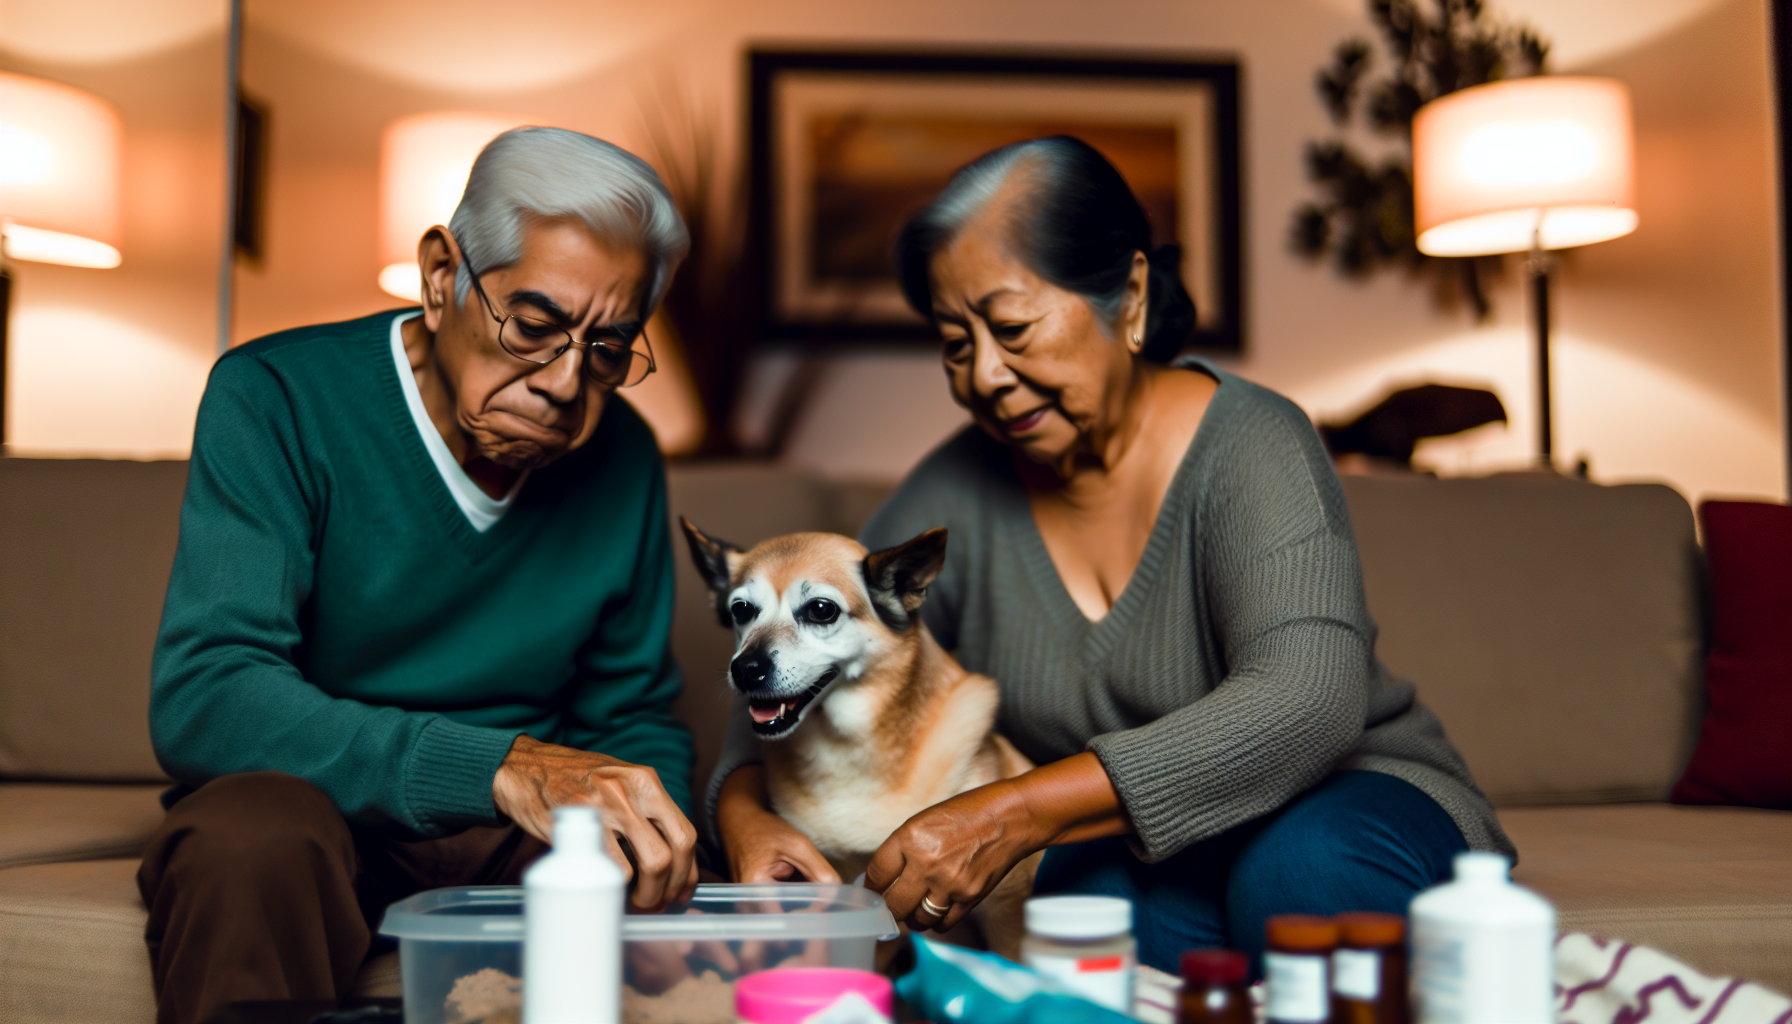 An older couple prepares a kit for their dog, sitting near them